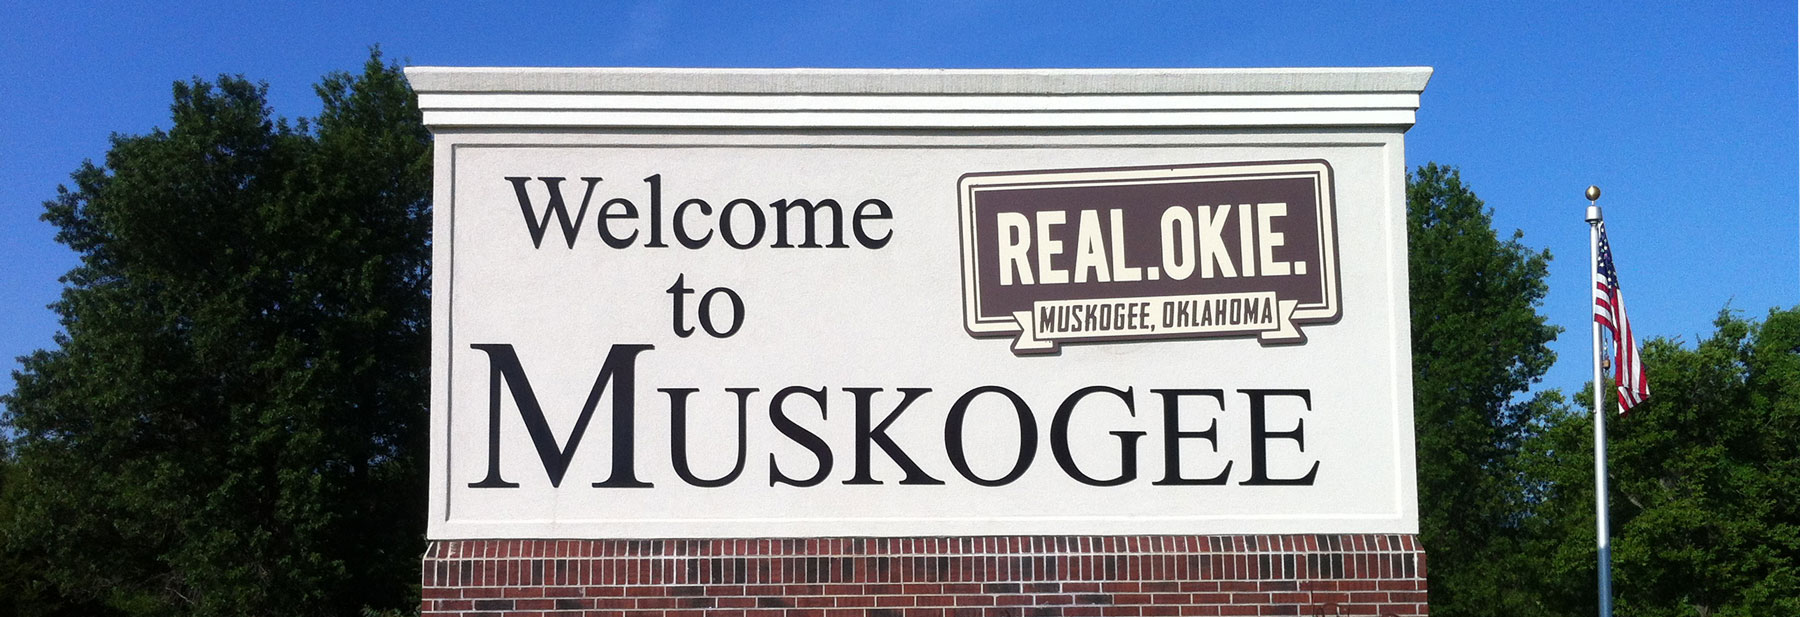 Muskogee Hosts Memorial Service to Honor Local Tuskegee Airman Graves